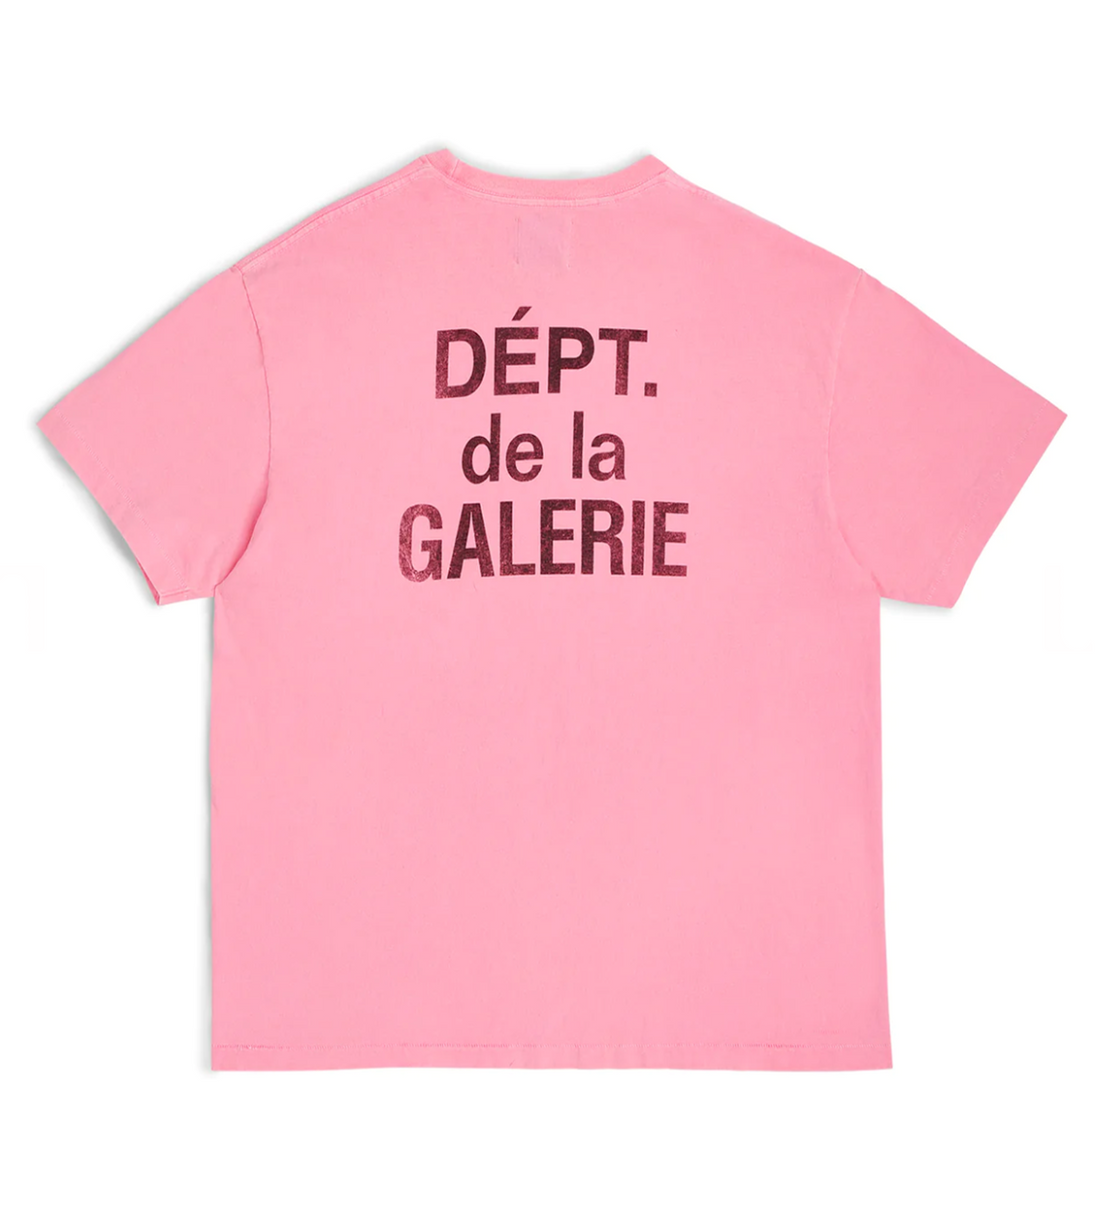 Gallery Dept. French Souvenir Flo Neon Pink Tee, Back View